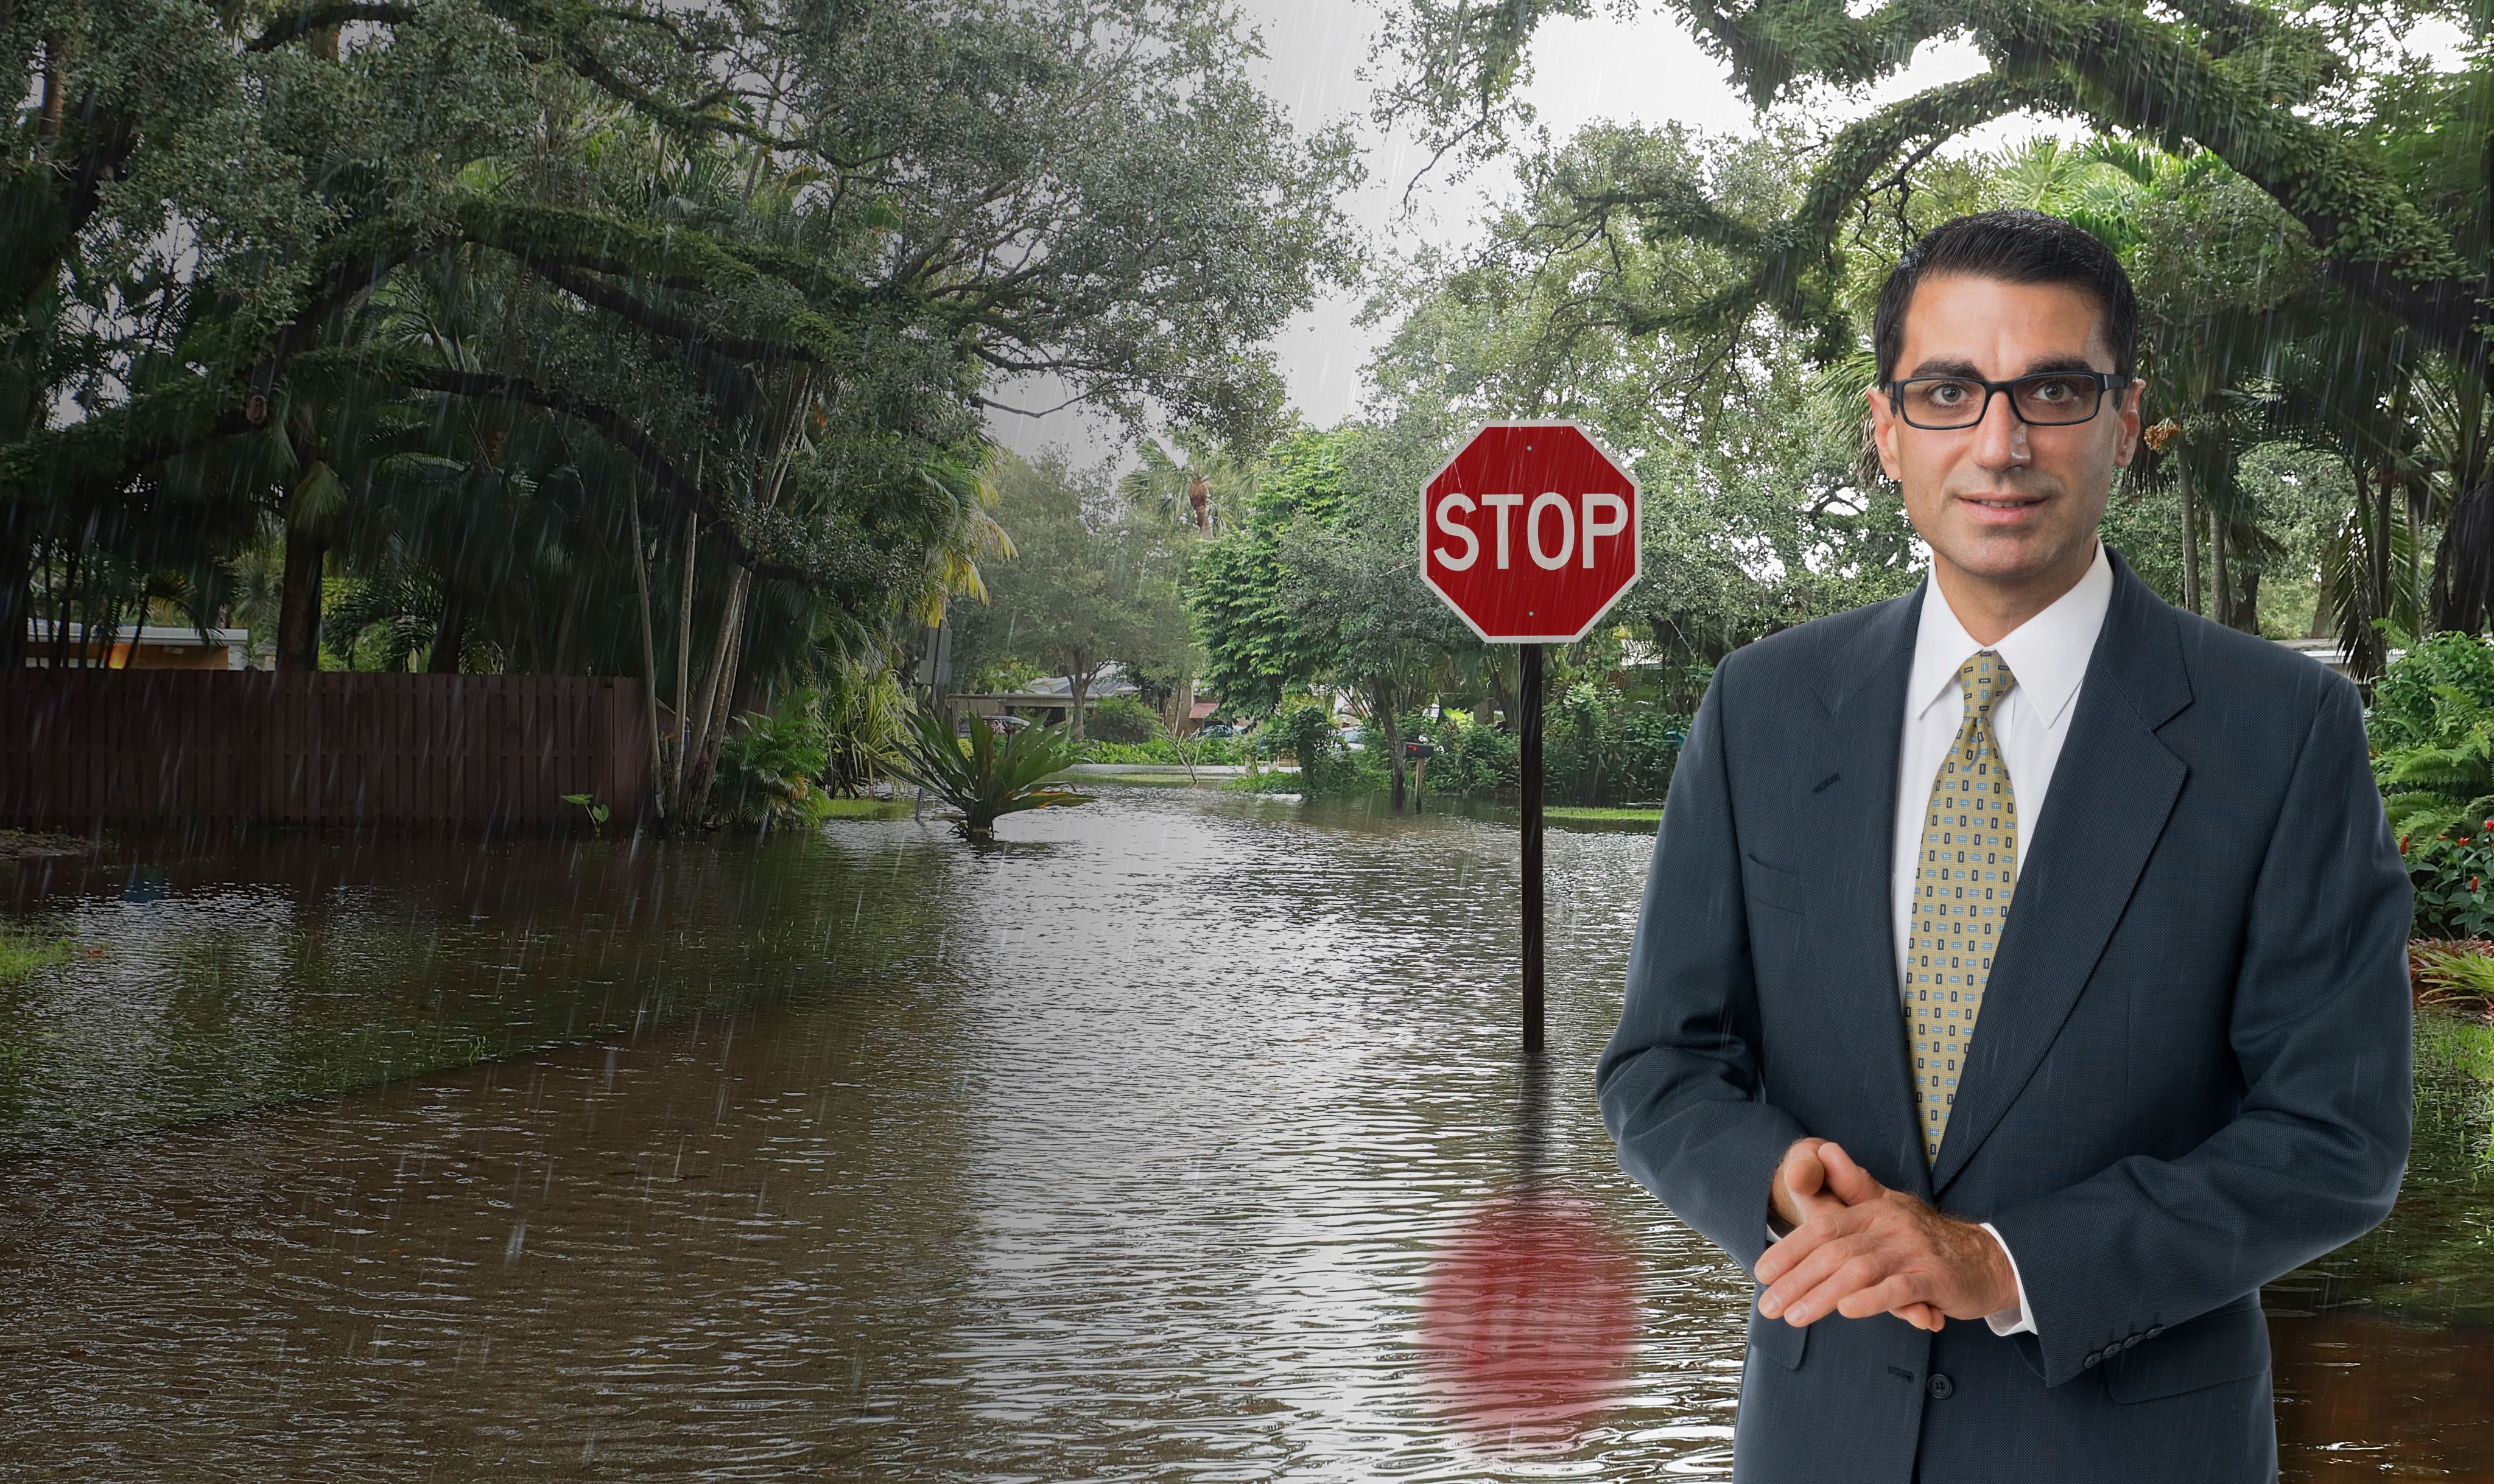 Amir Behzadan in front of a stop sign